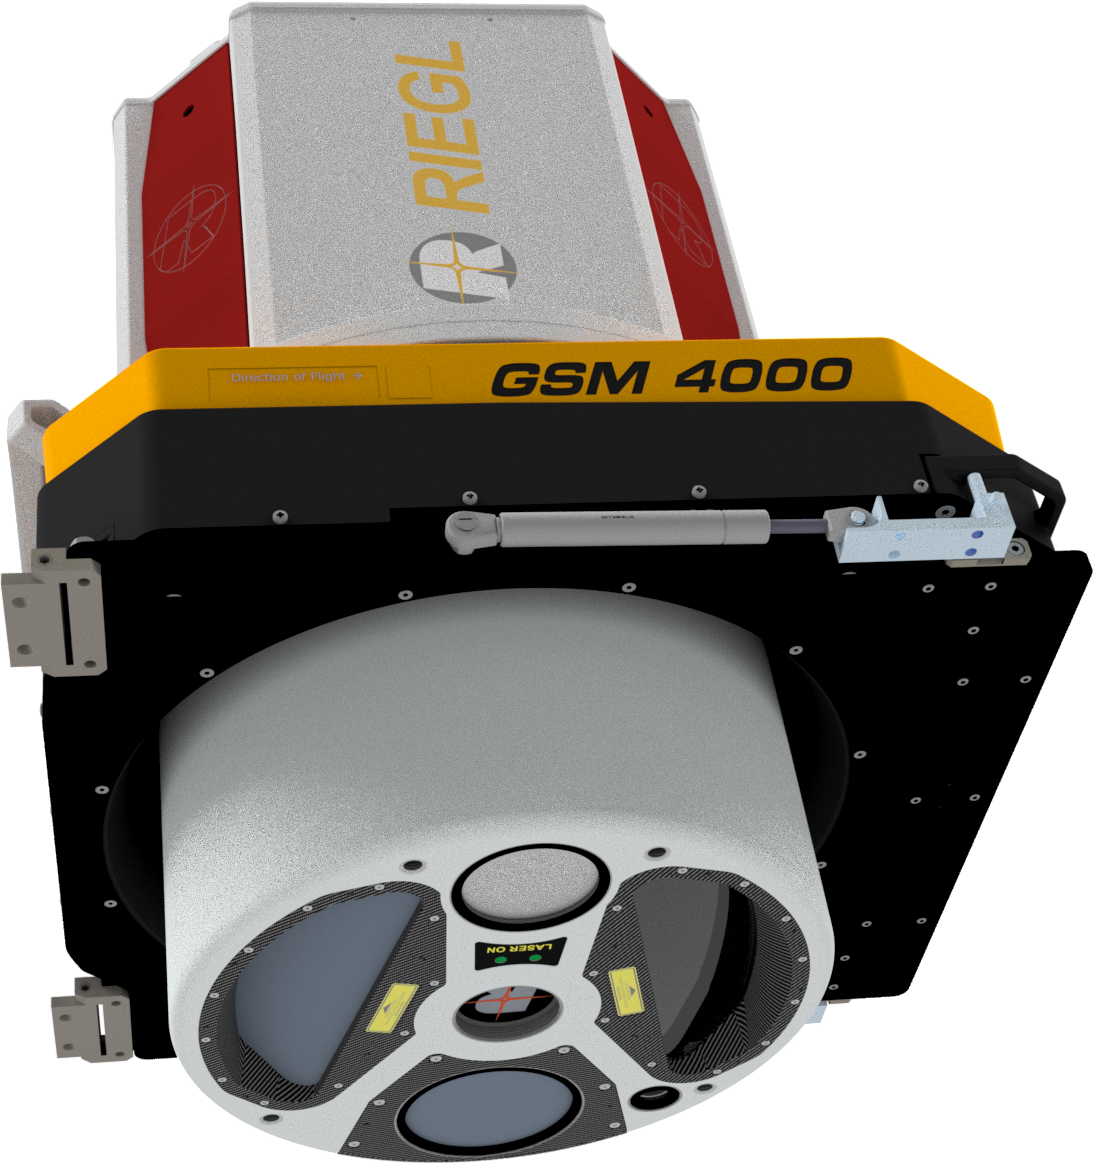 GSM 4000 with Riegl-VQ-1560 II lidar